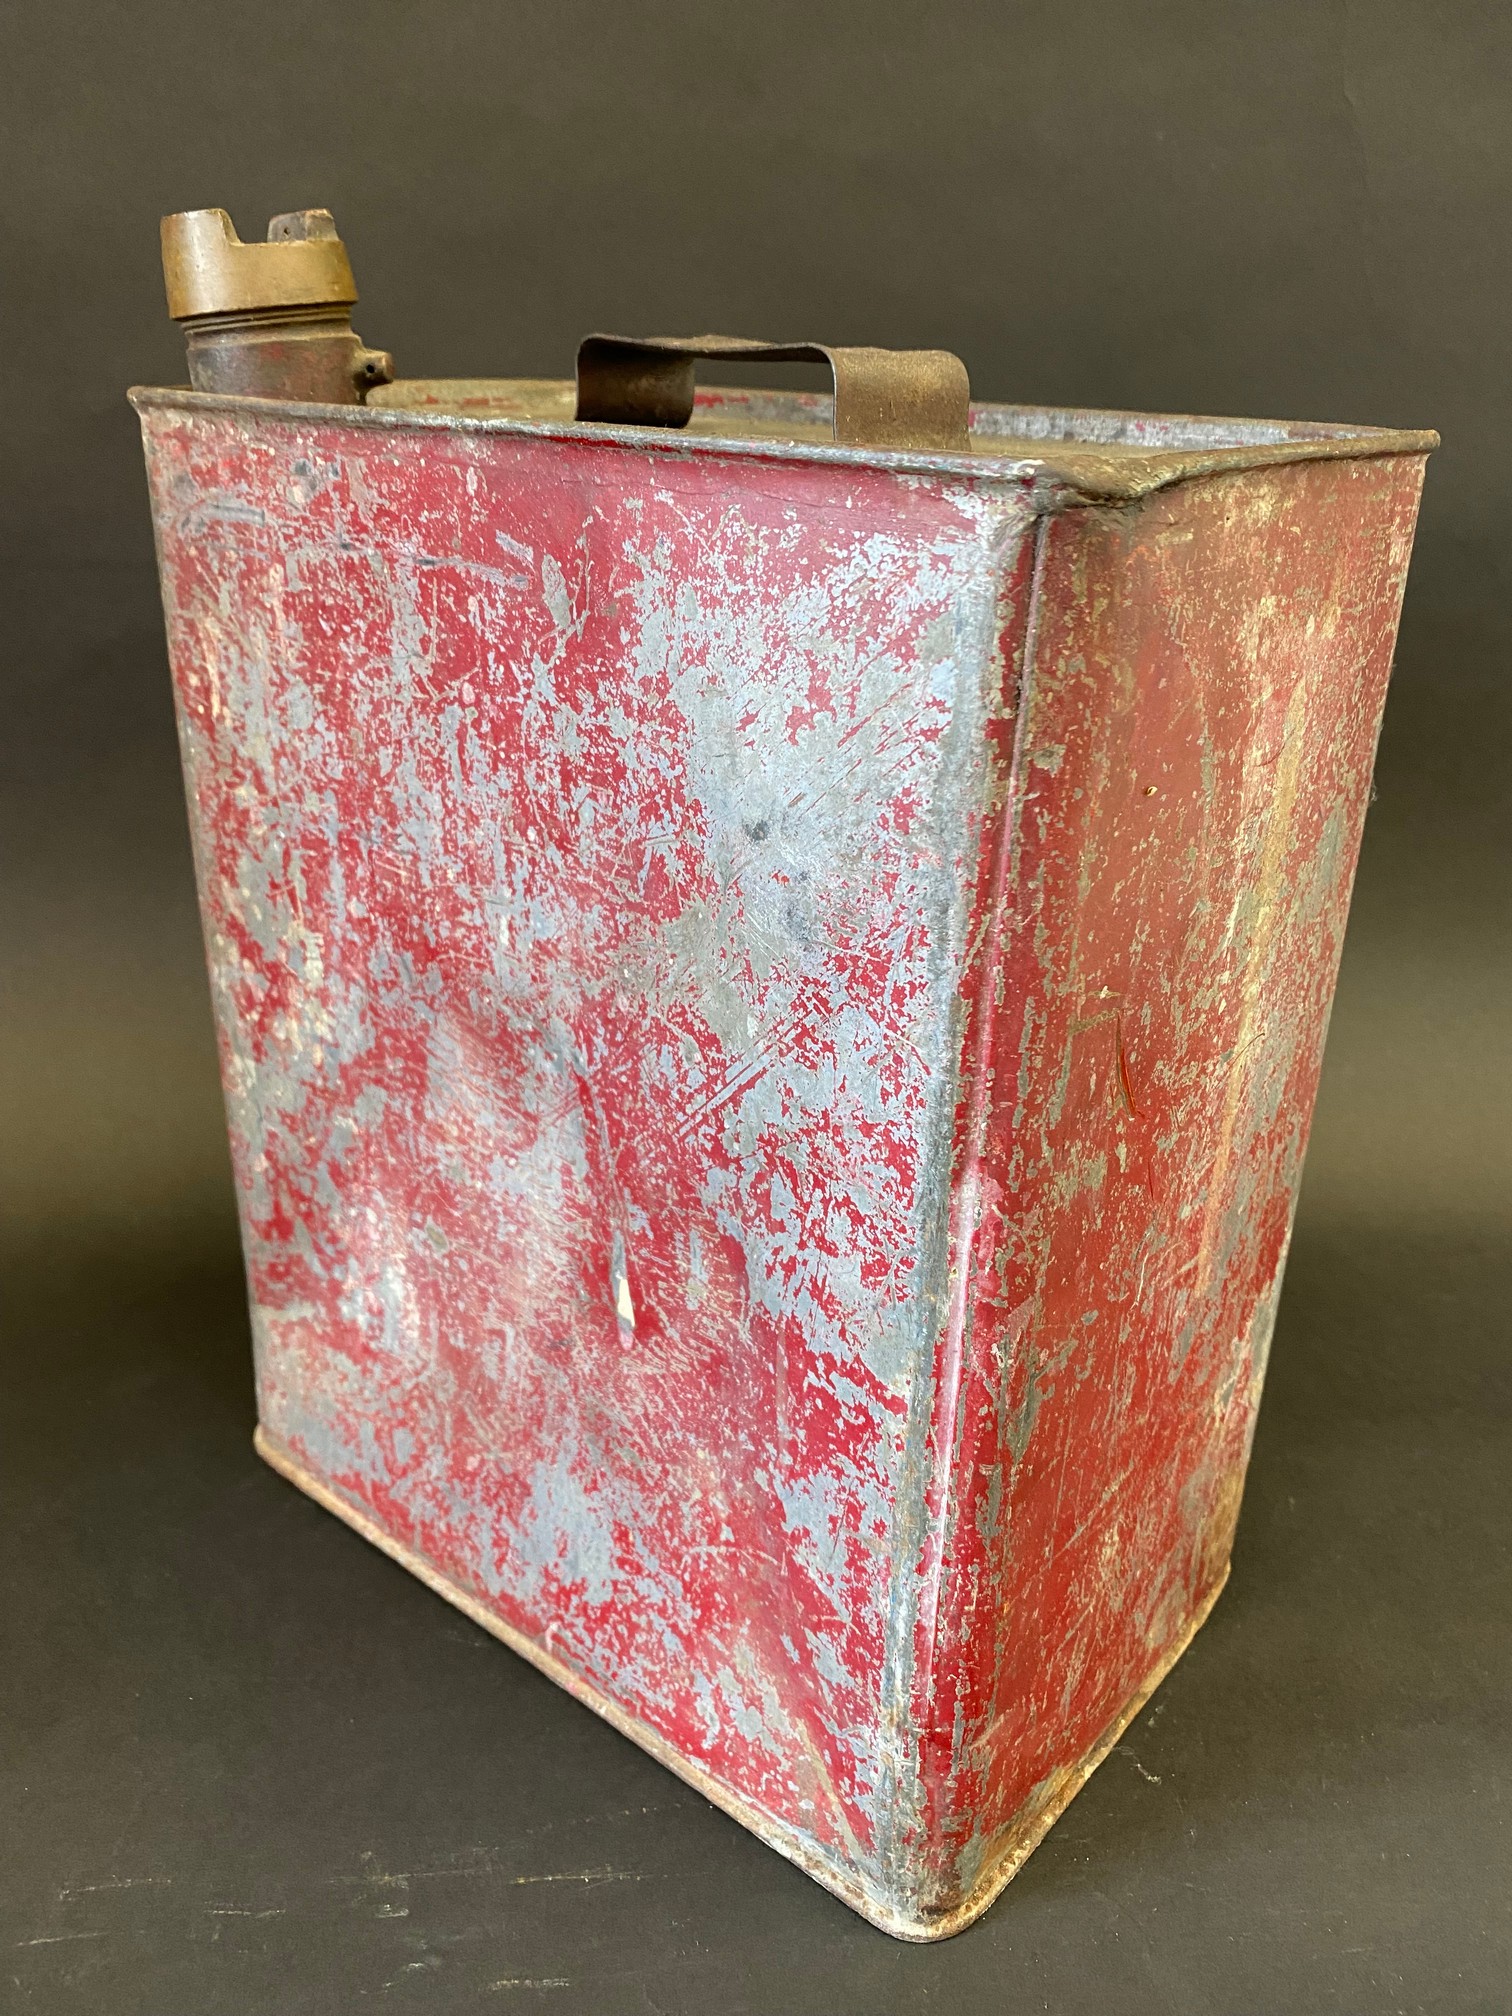 A Mobiloil 'B' grade two Imperial gallon petrol can in original paint. - Image 2 of 4